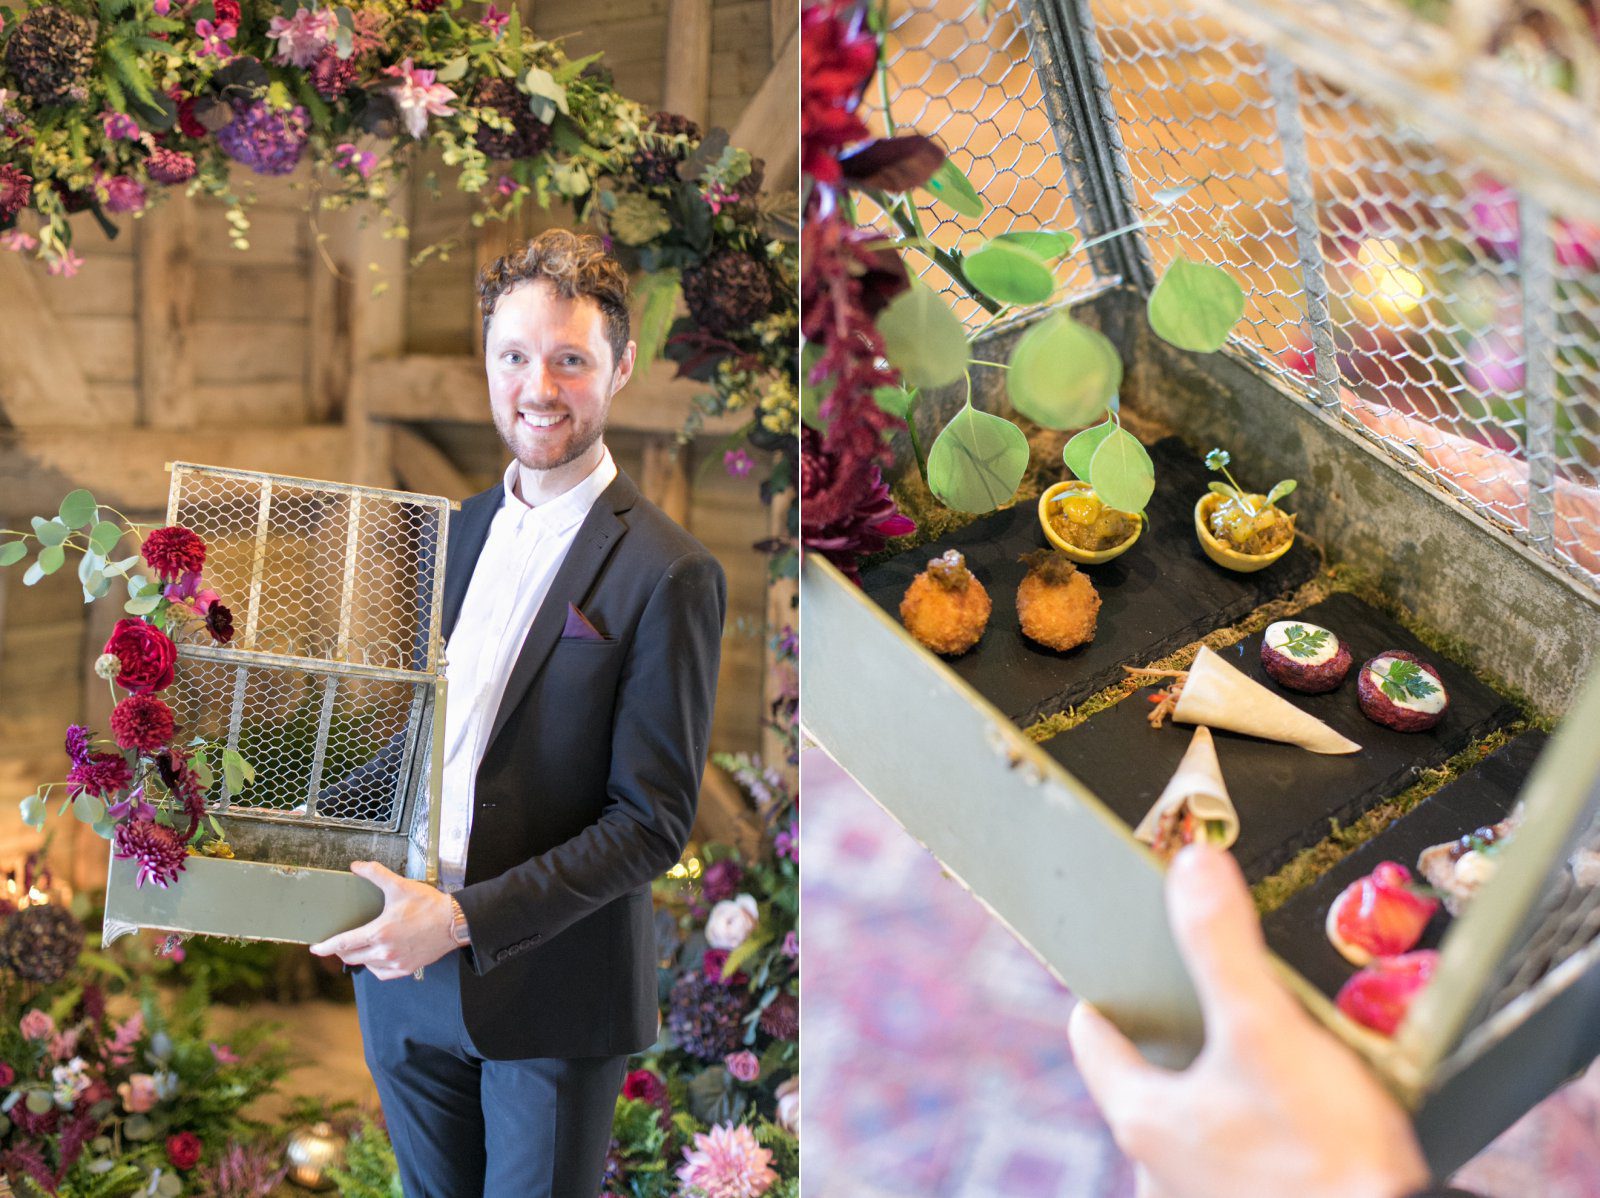 Pete Holt from Kalm Kitchen serves the wedding couple canapes